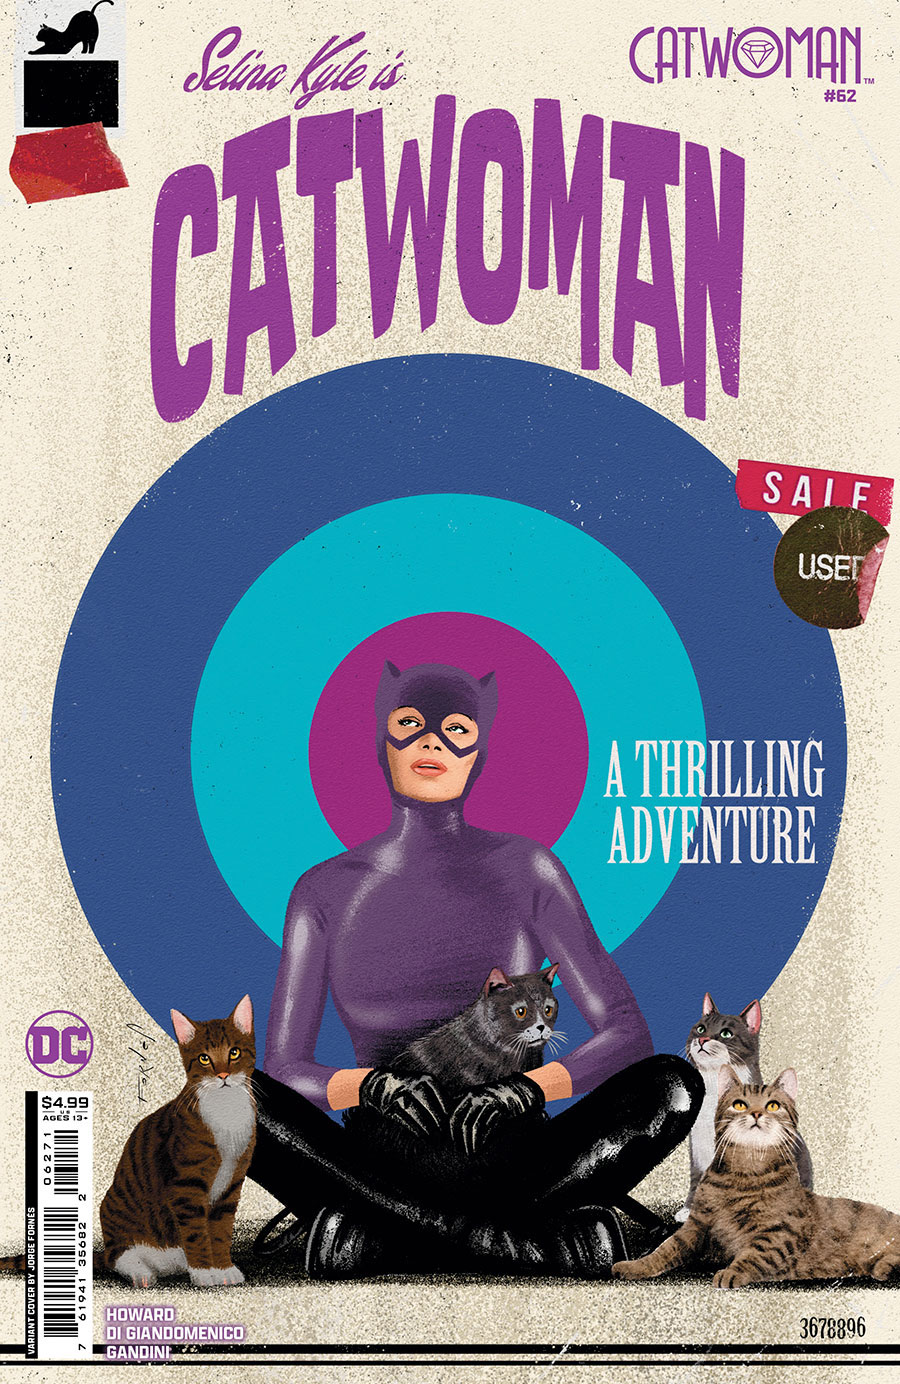 Catwoman Vol 5 #62 Cover D Variant Jorge Fornes Cover